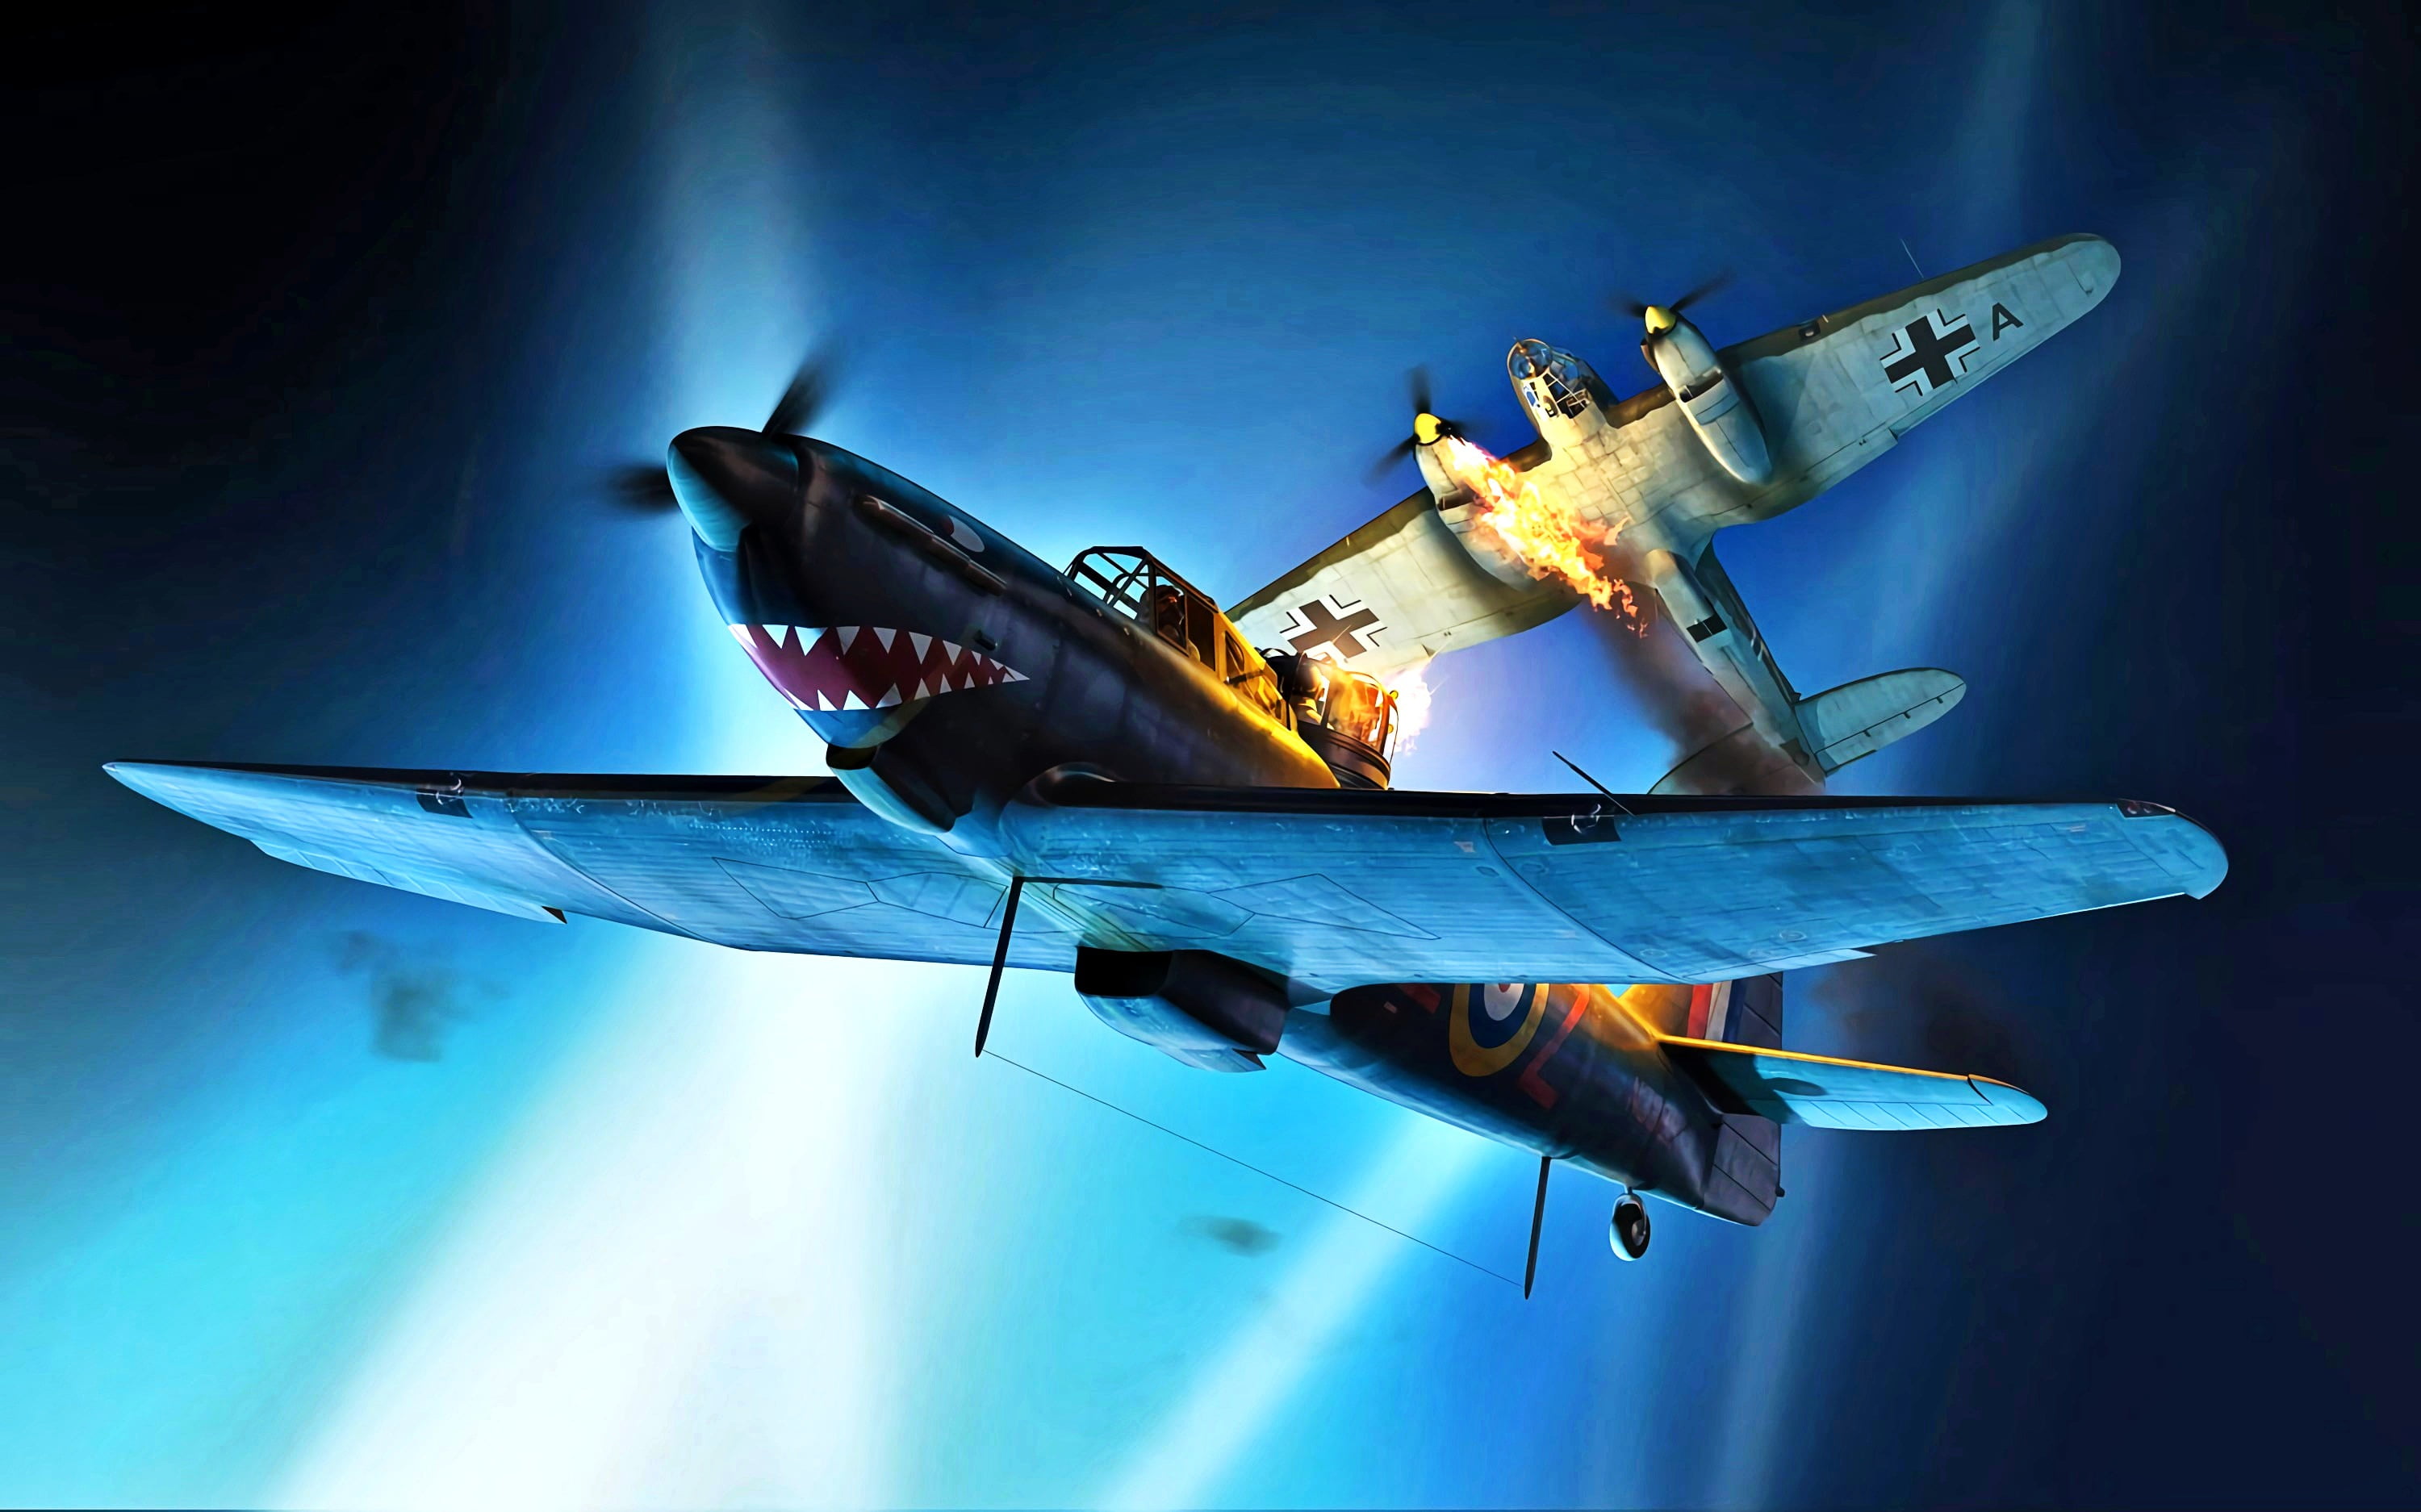 night, bomber, He 111, The second World war, the beams from the spotlights